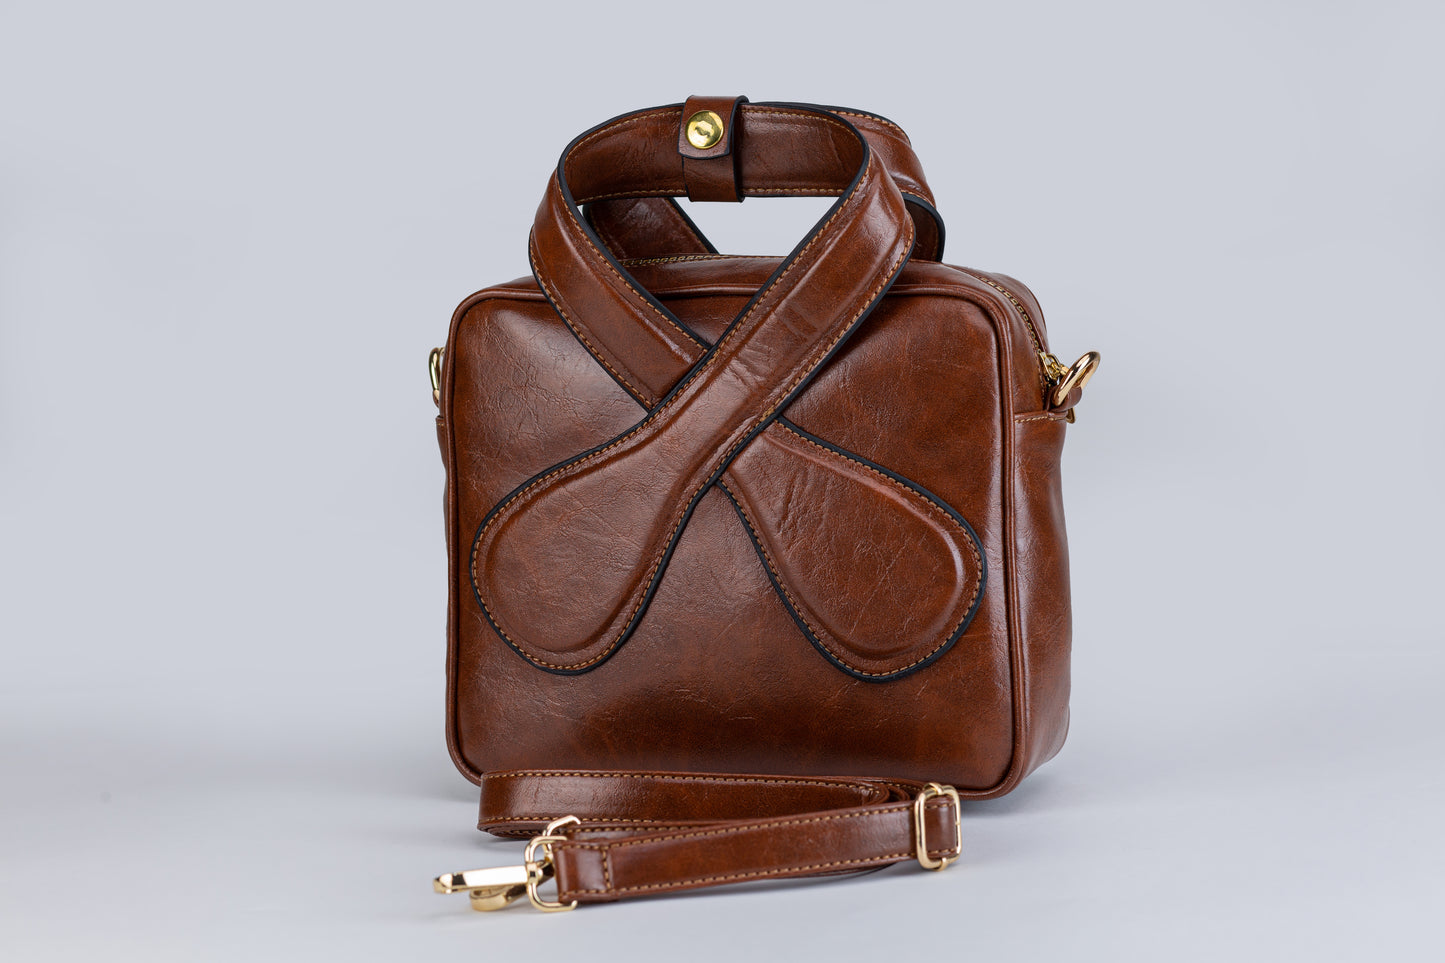 66 -Two Hand Crossbody - brown